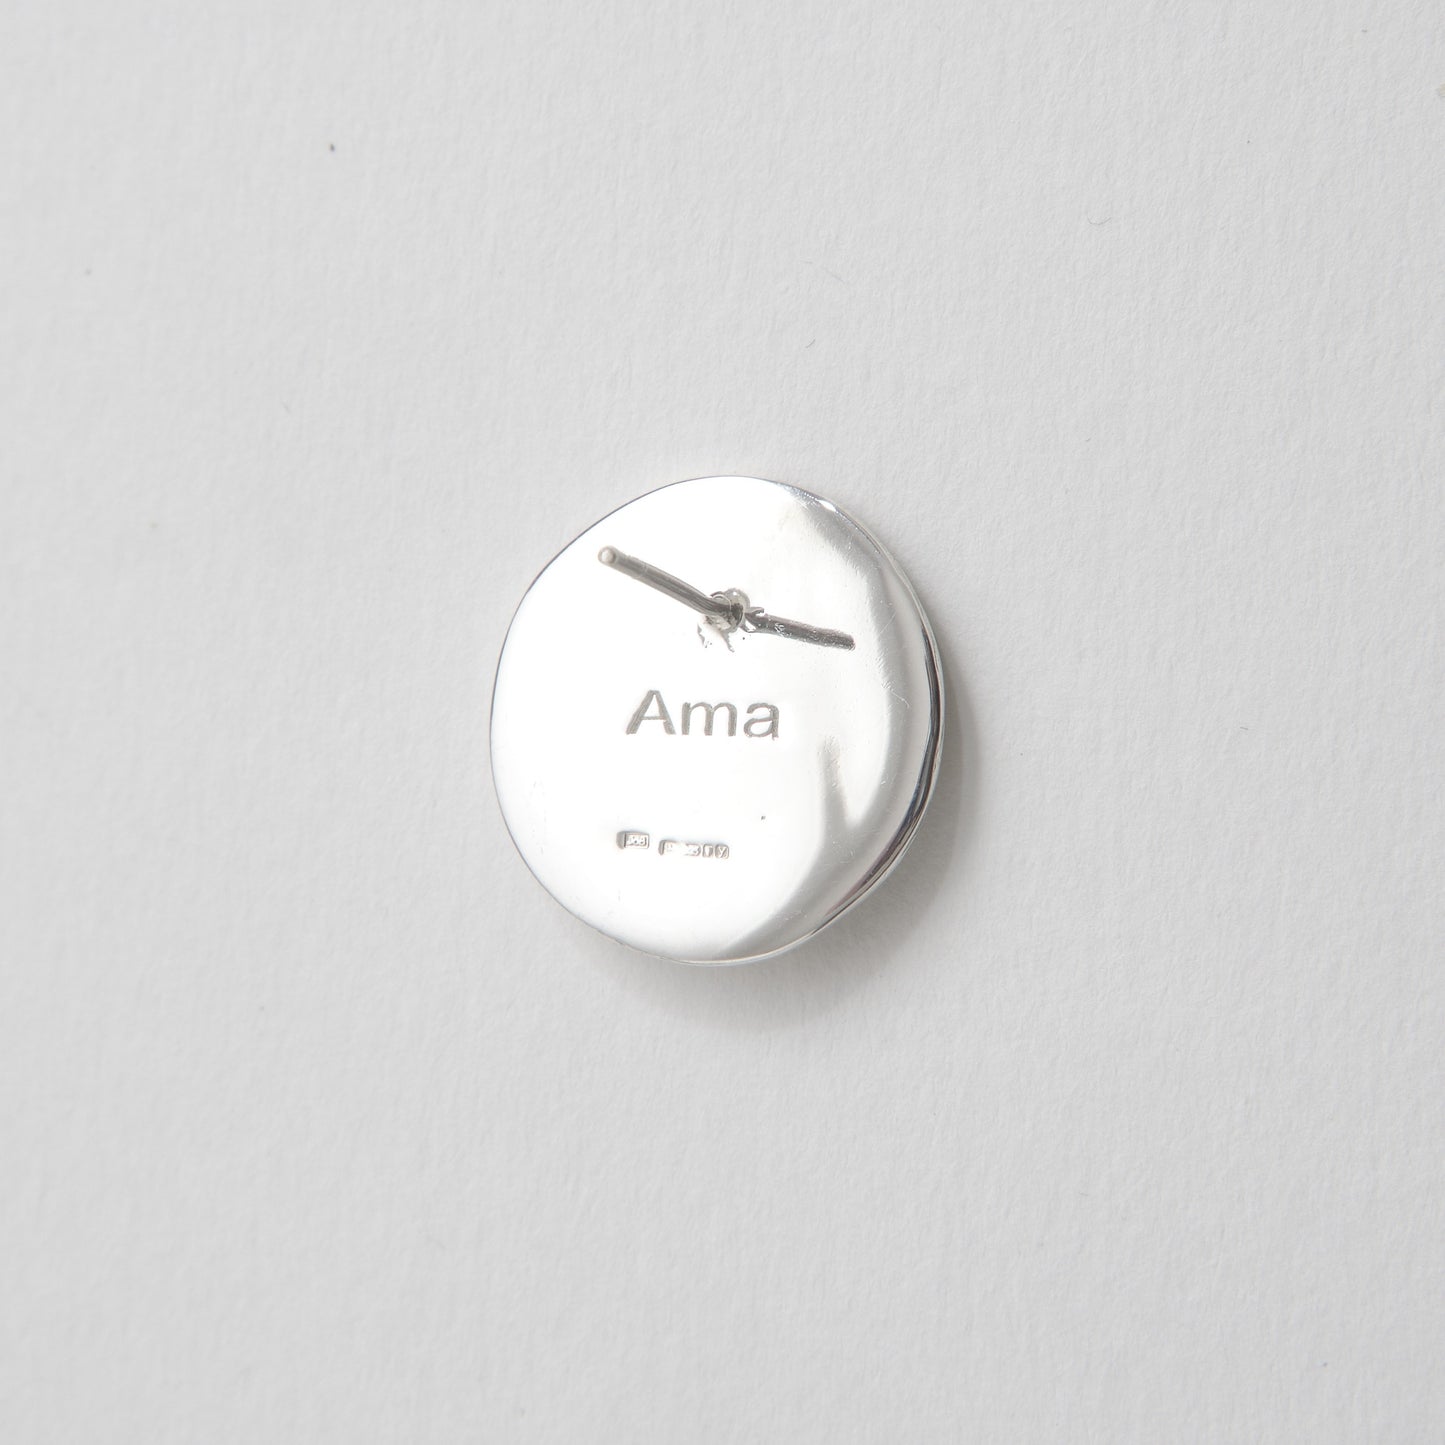 Ama Recycled Silver Stud Earrings